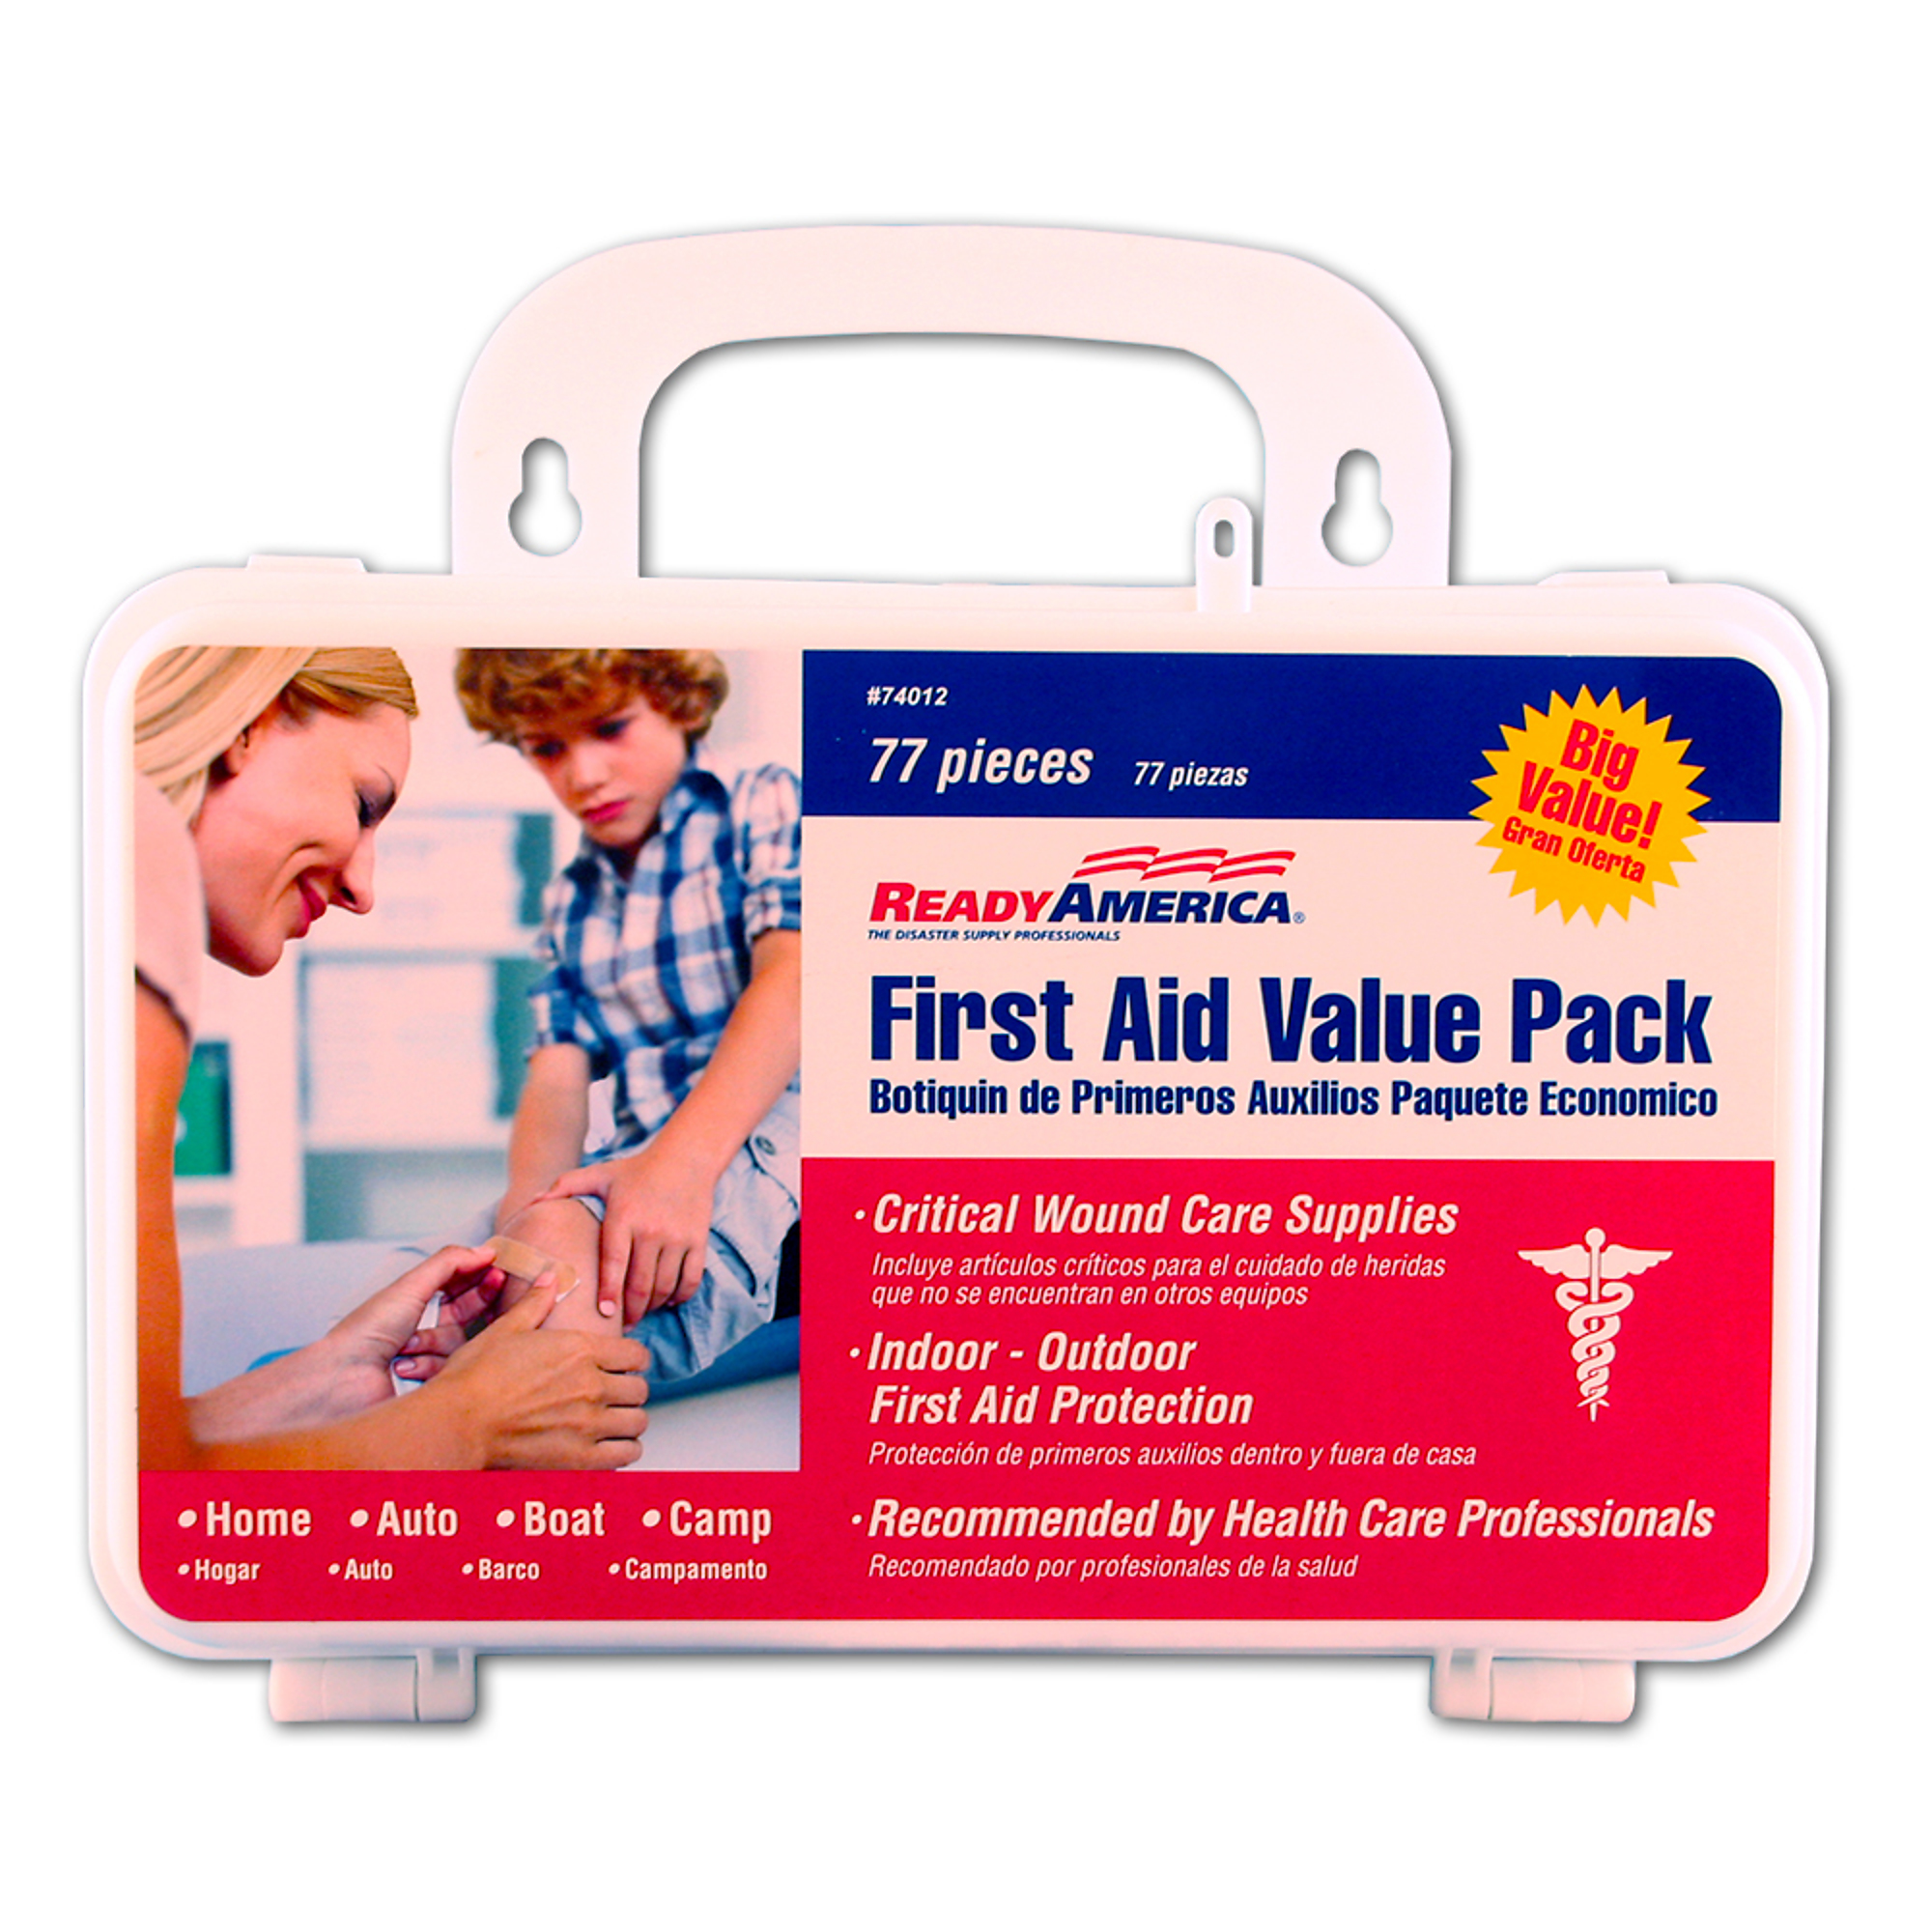 Ready America, First Aid Value Kit, 77 Piece (6 pack), Items Per Kit 77, Model 74013